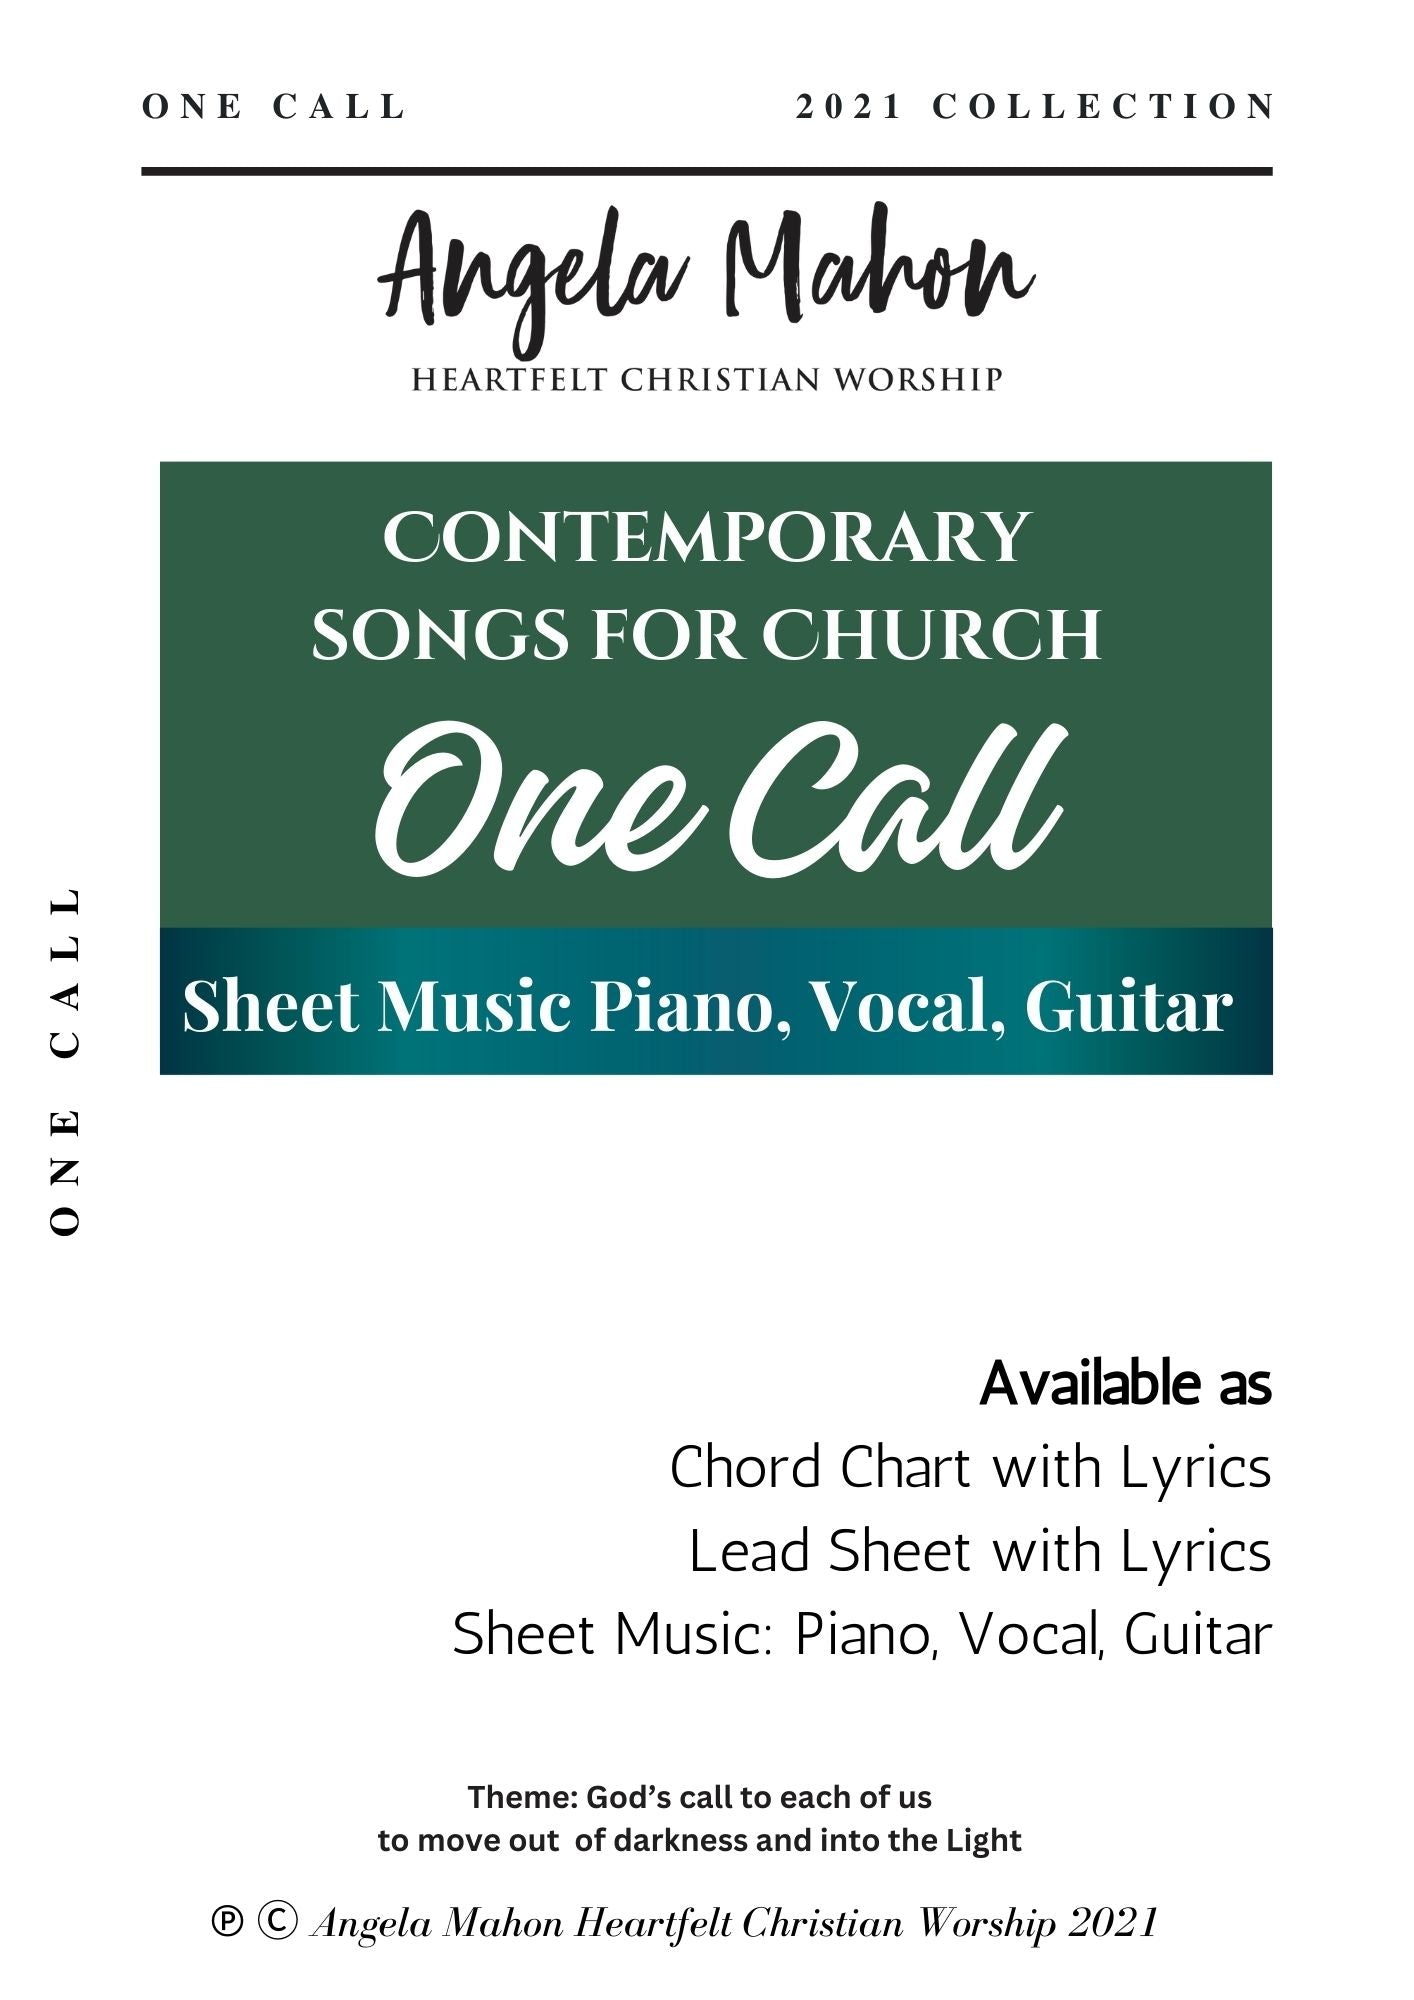 One Call by Angela Mahon (Physical Booklet of Sheet Music)